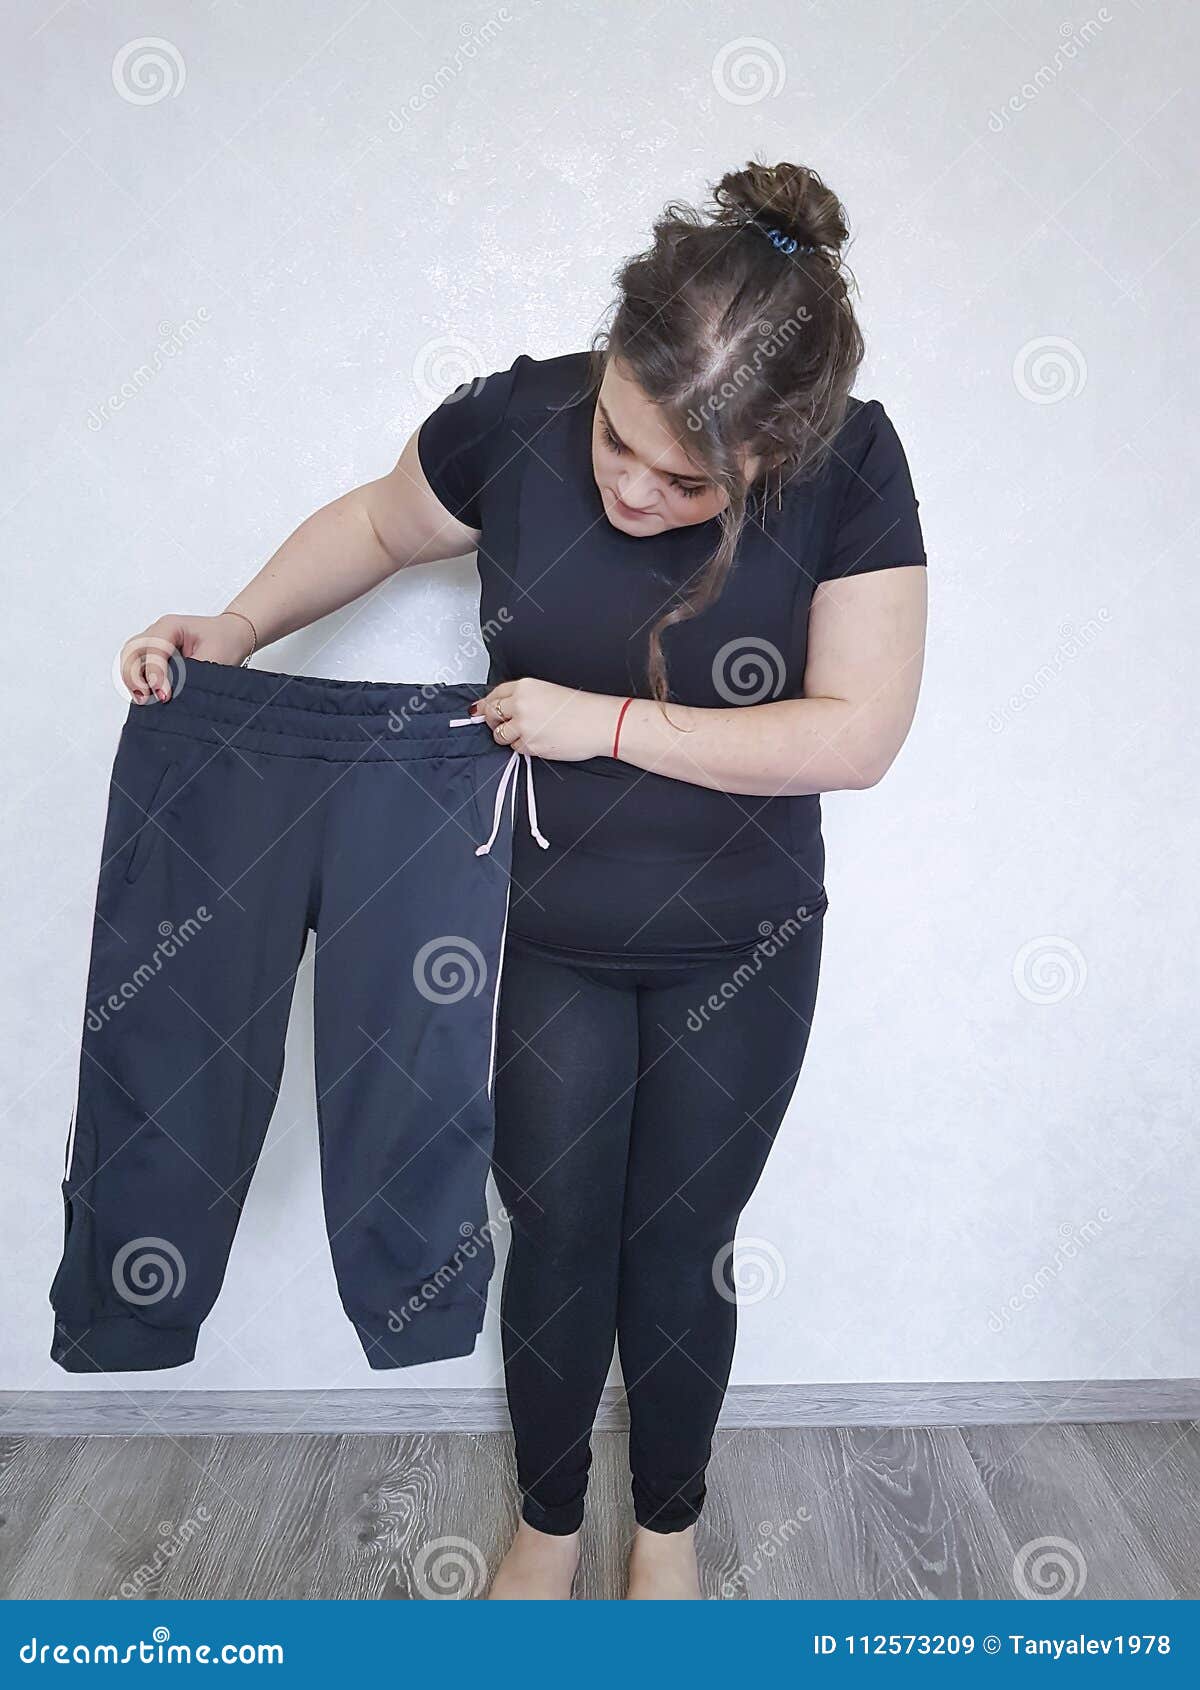 Full Woman Tries on Too Small Pants Lose Stock Image - Image of